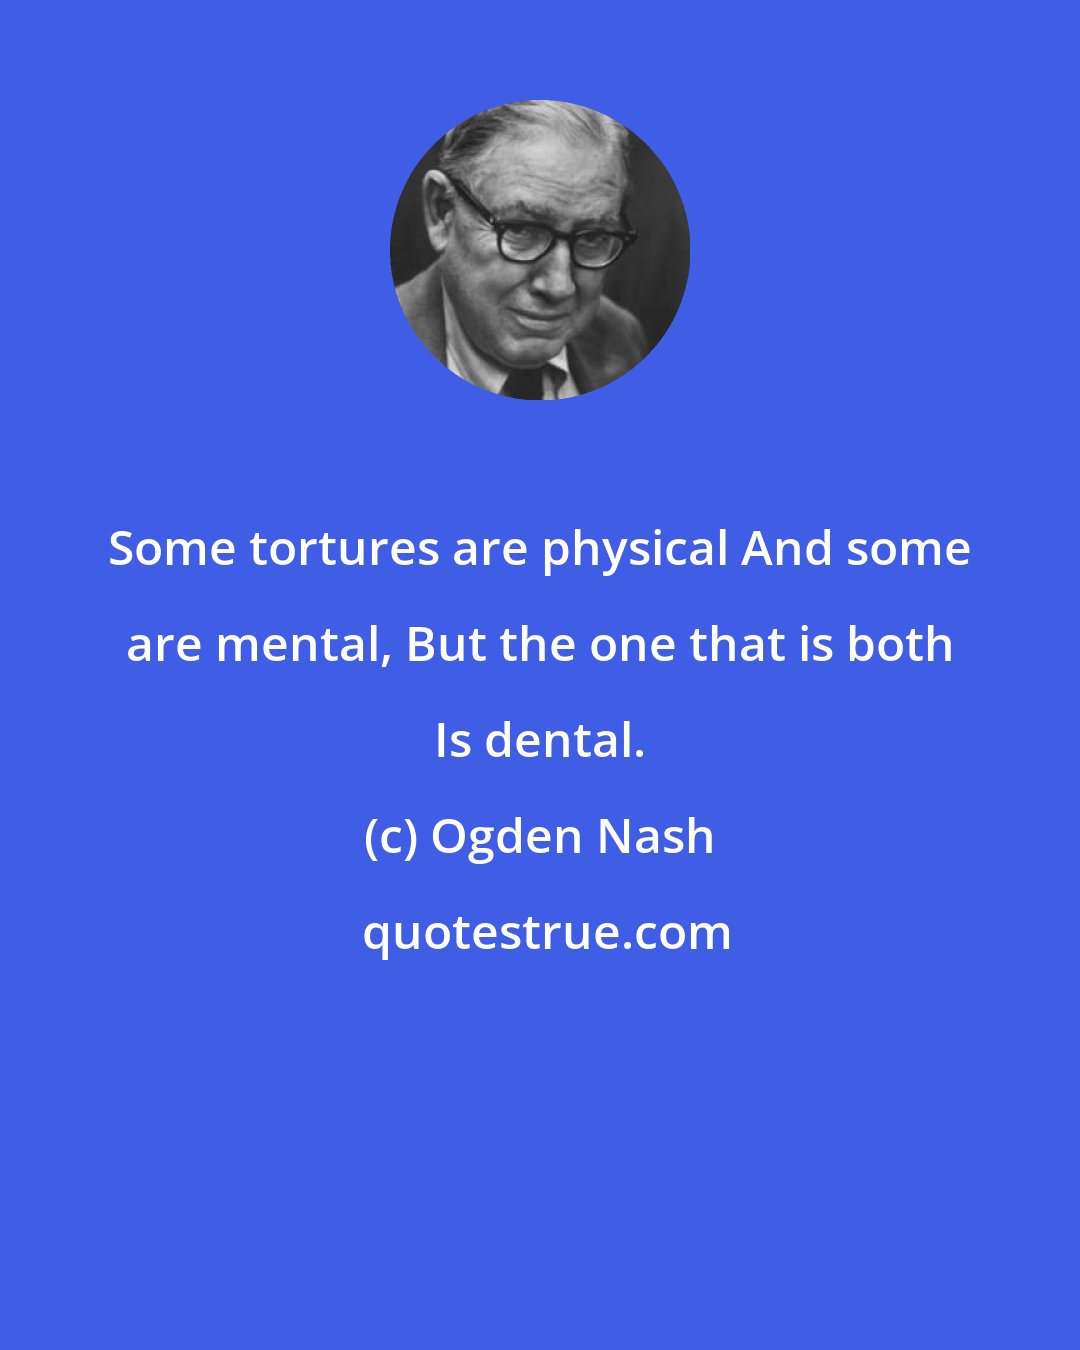 Ogden Nash: Some tortures are physical And some are mental, But the one that is both Is dental.